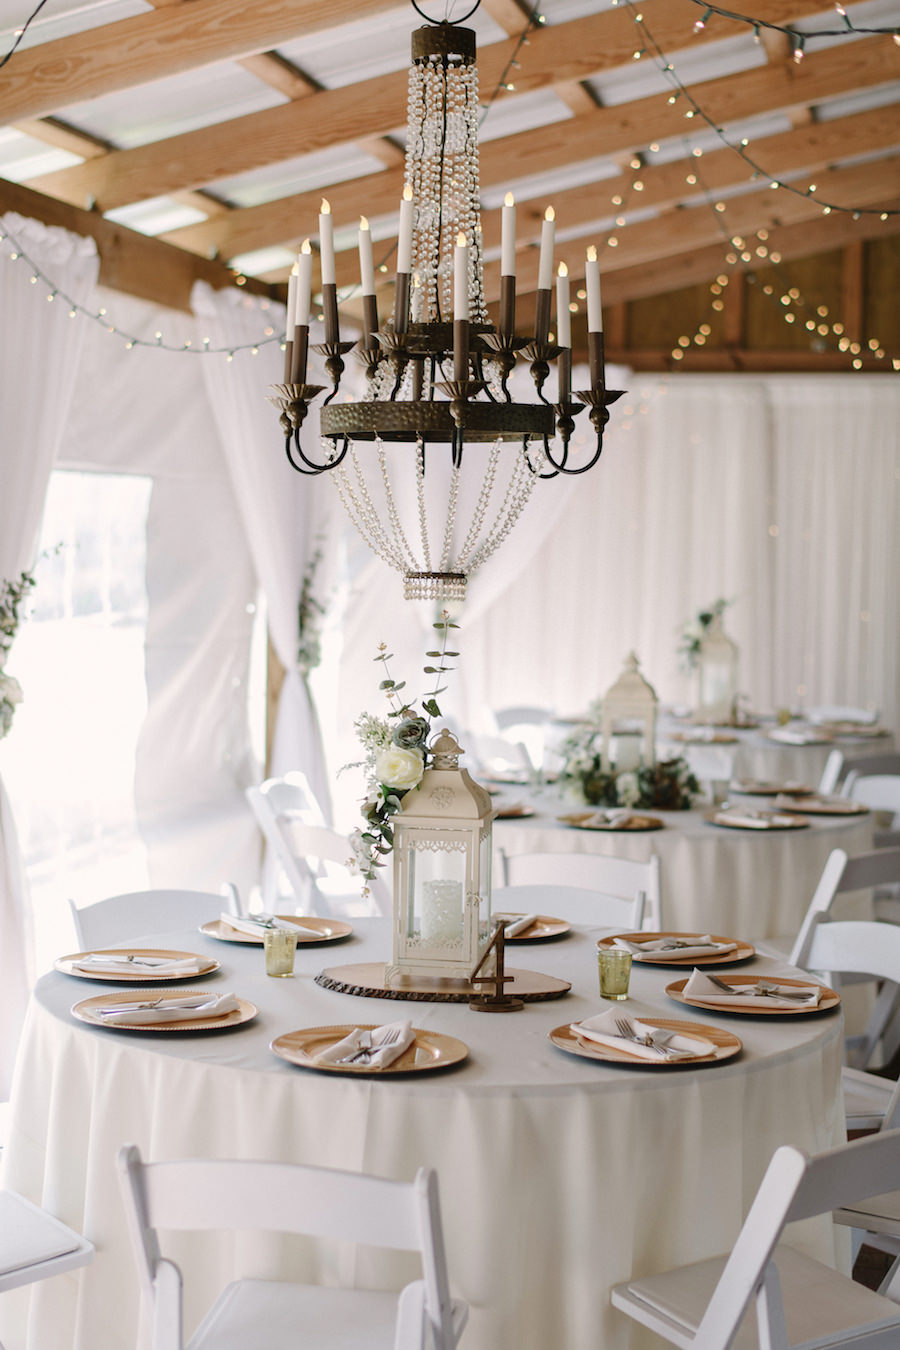 Rustic Ranch Wedding with White Linens, Rustic Brass Chandeliers and Twinkle Lights at Tampa Bay Rustic Wedding Venue Cross Creek Ranch